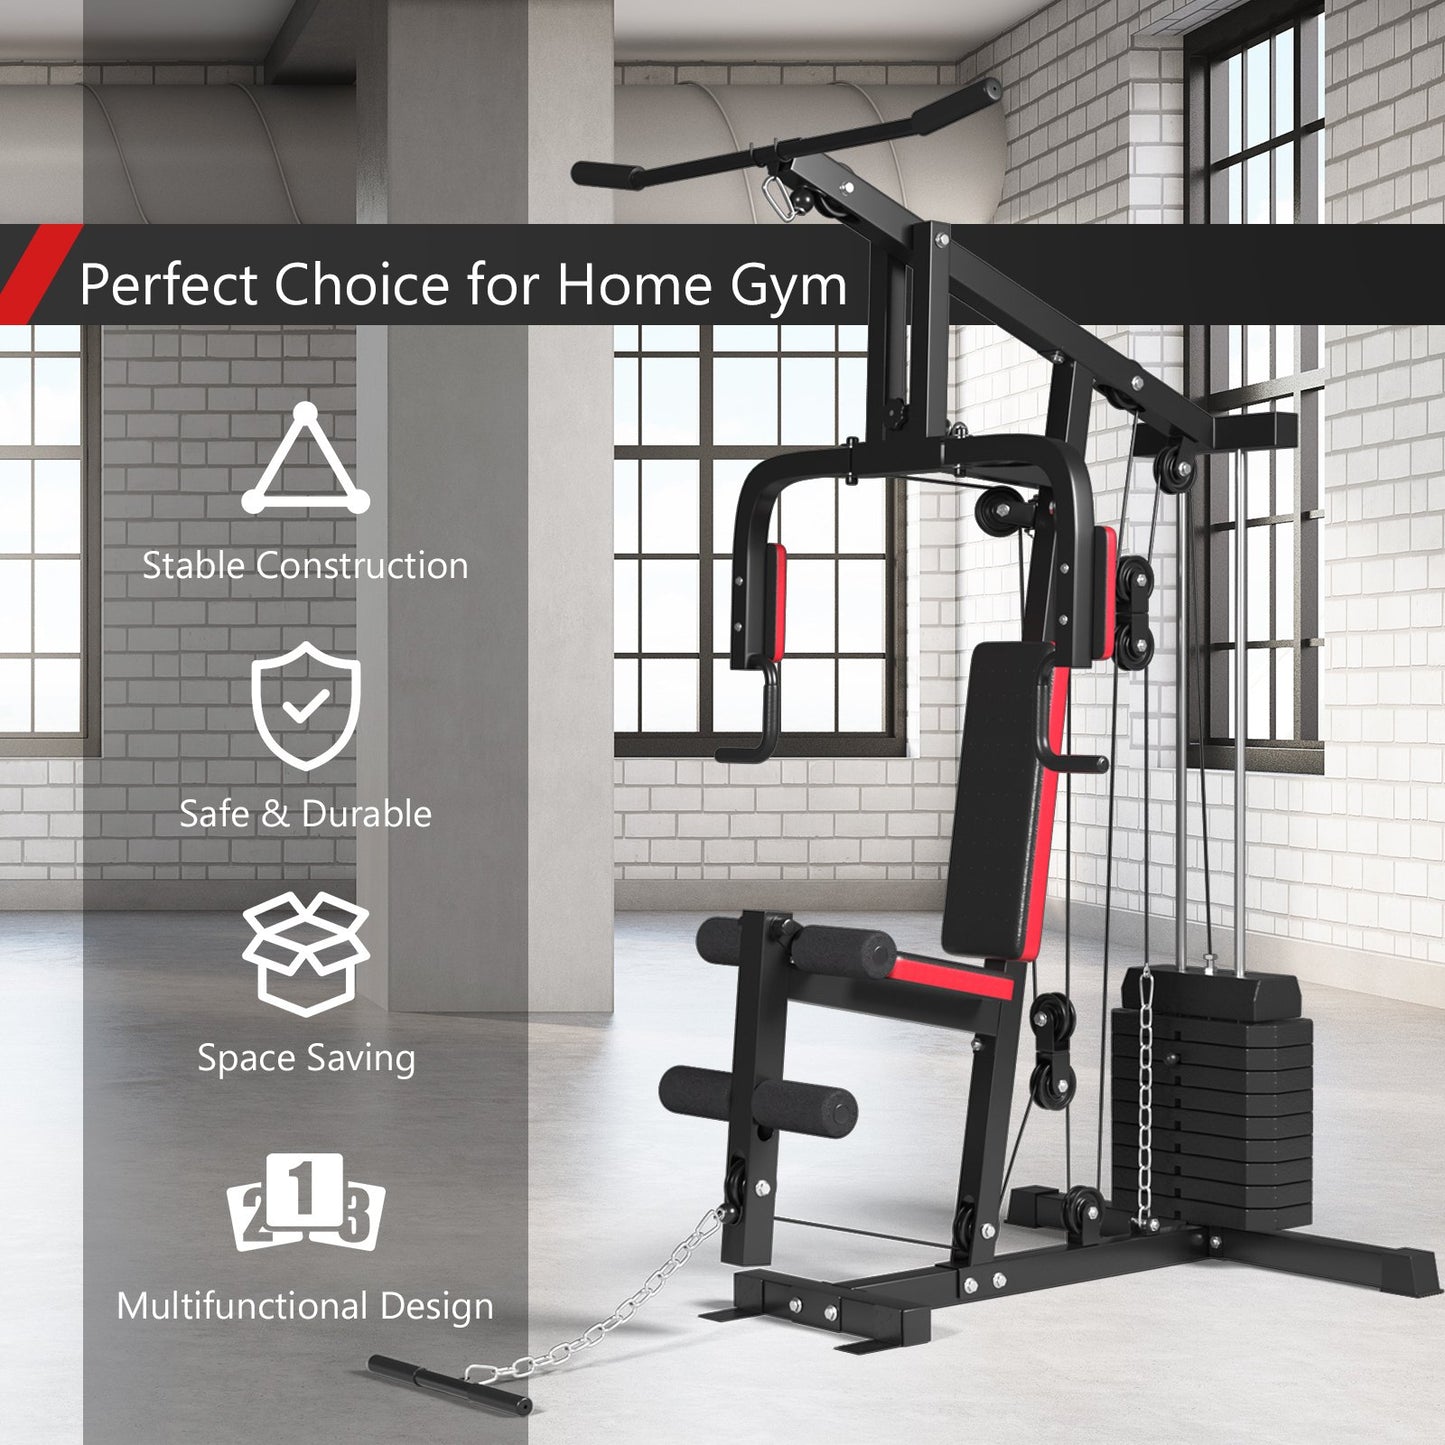 Multifunction Cross Trainer Workout Machine, Black - Gallery Canada